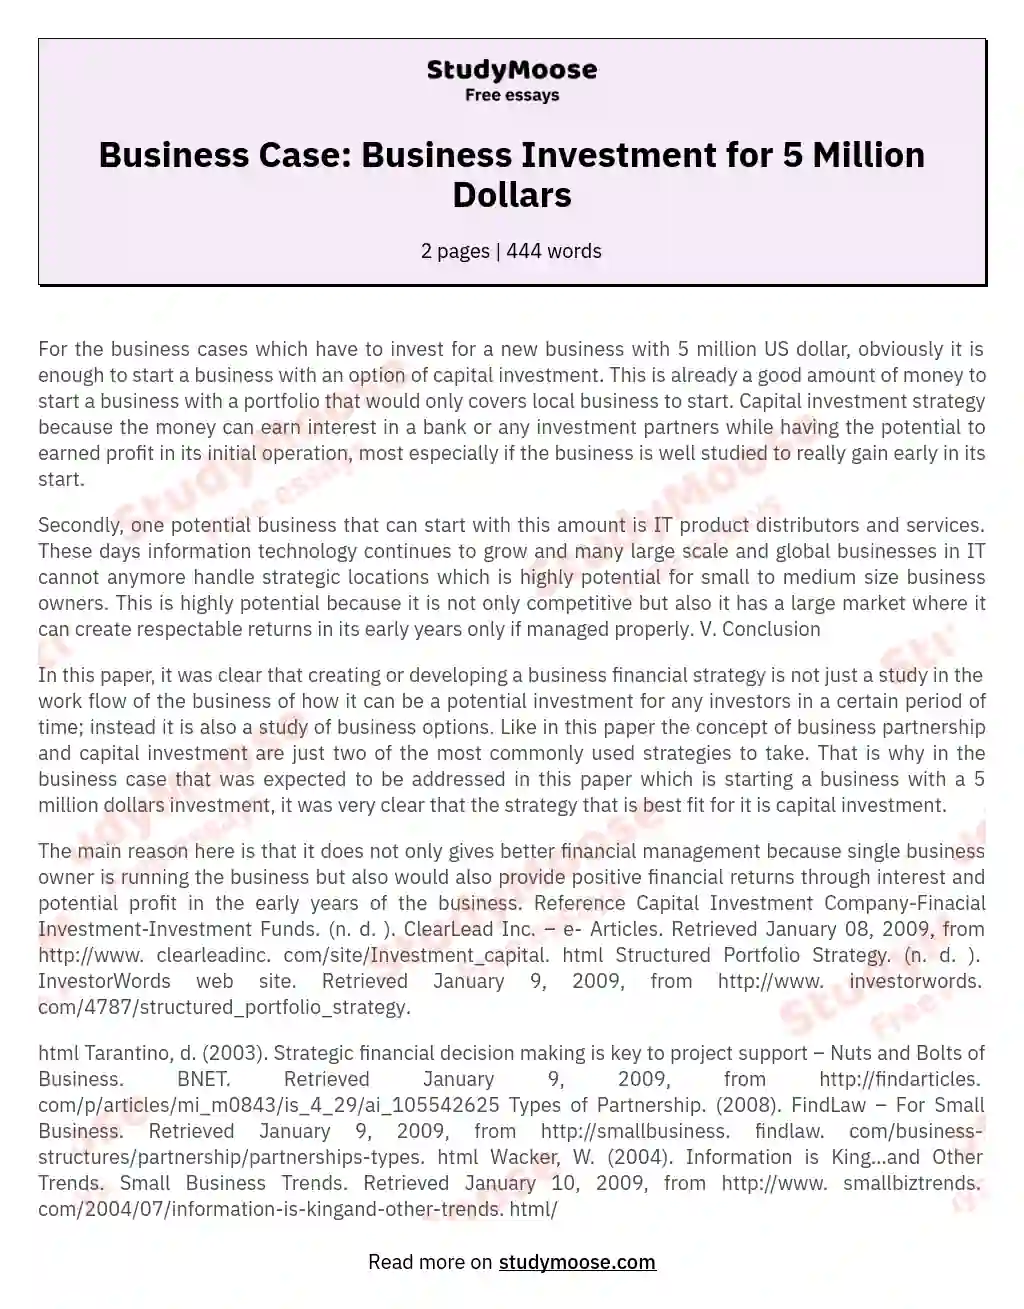 Business Case: Business Investment for 5 Million Dollars